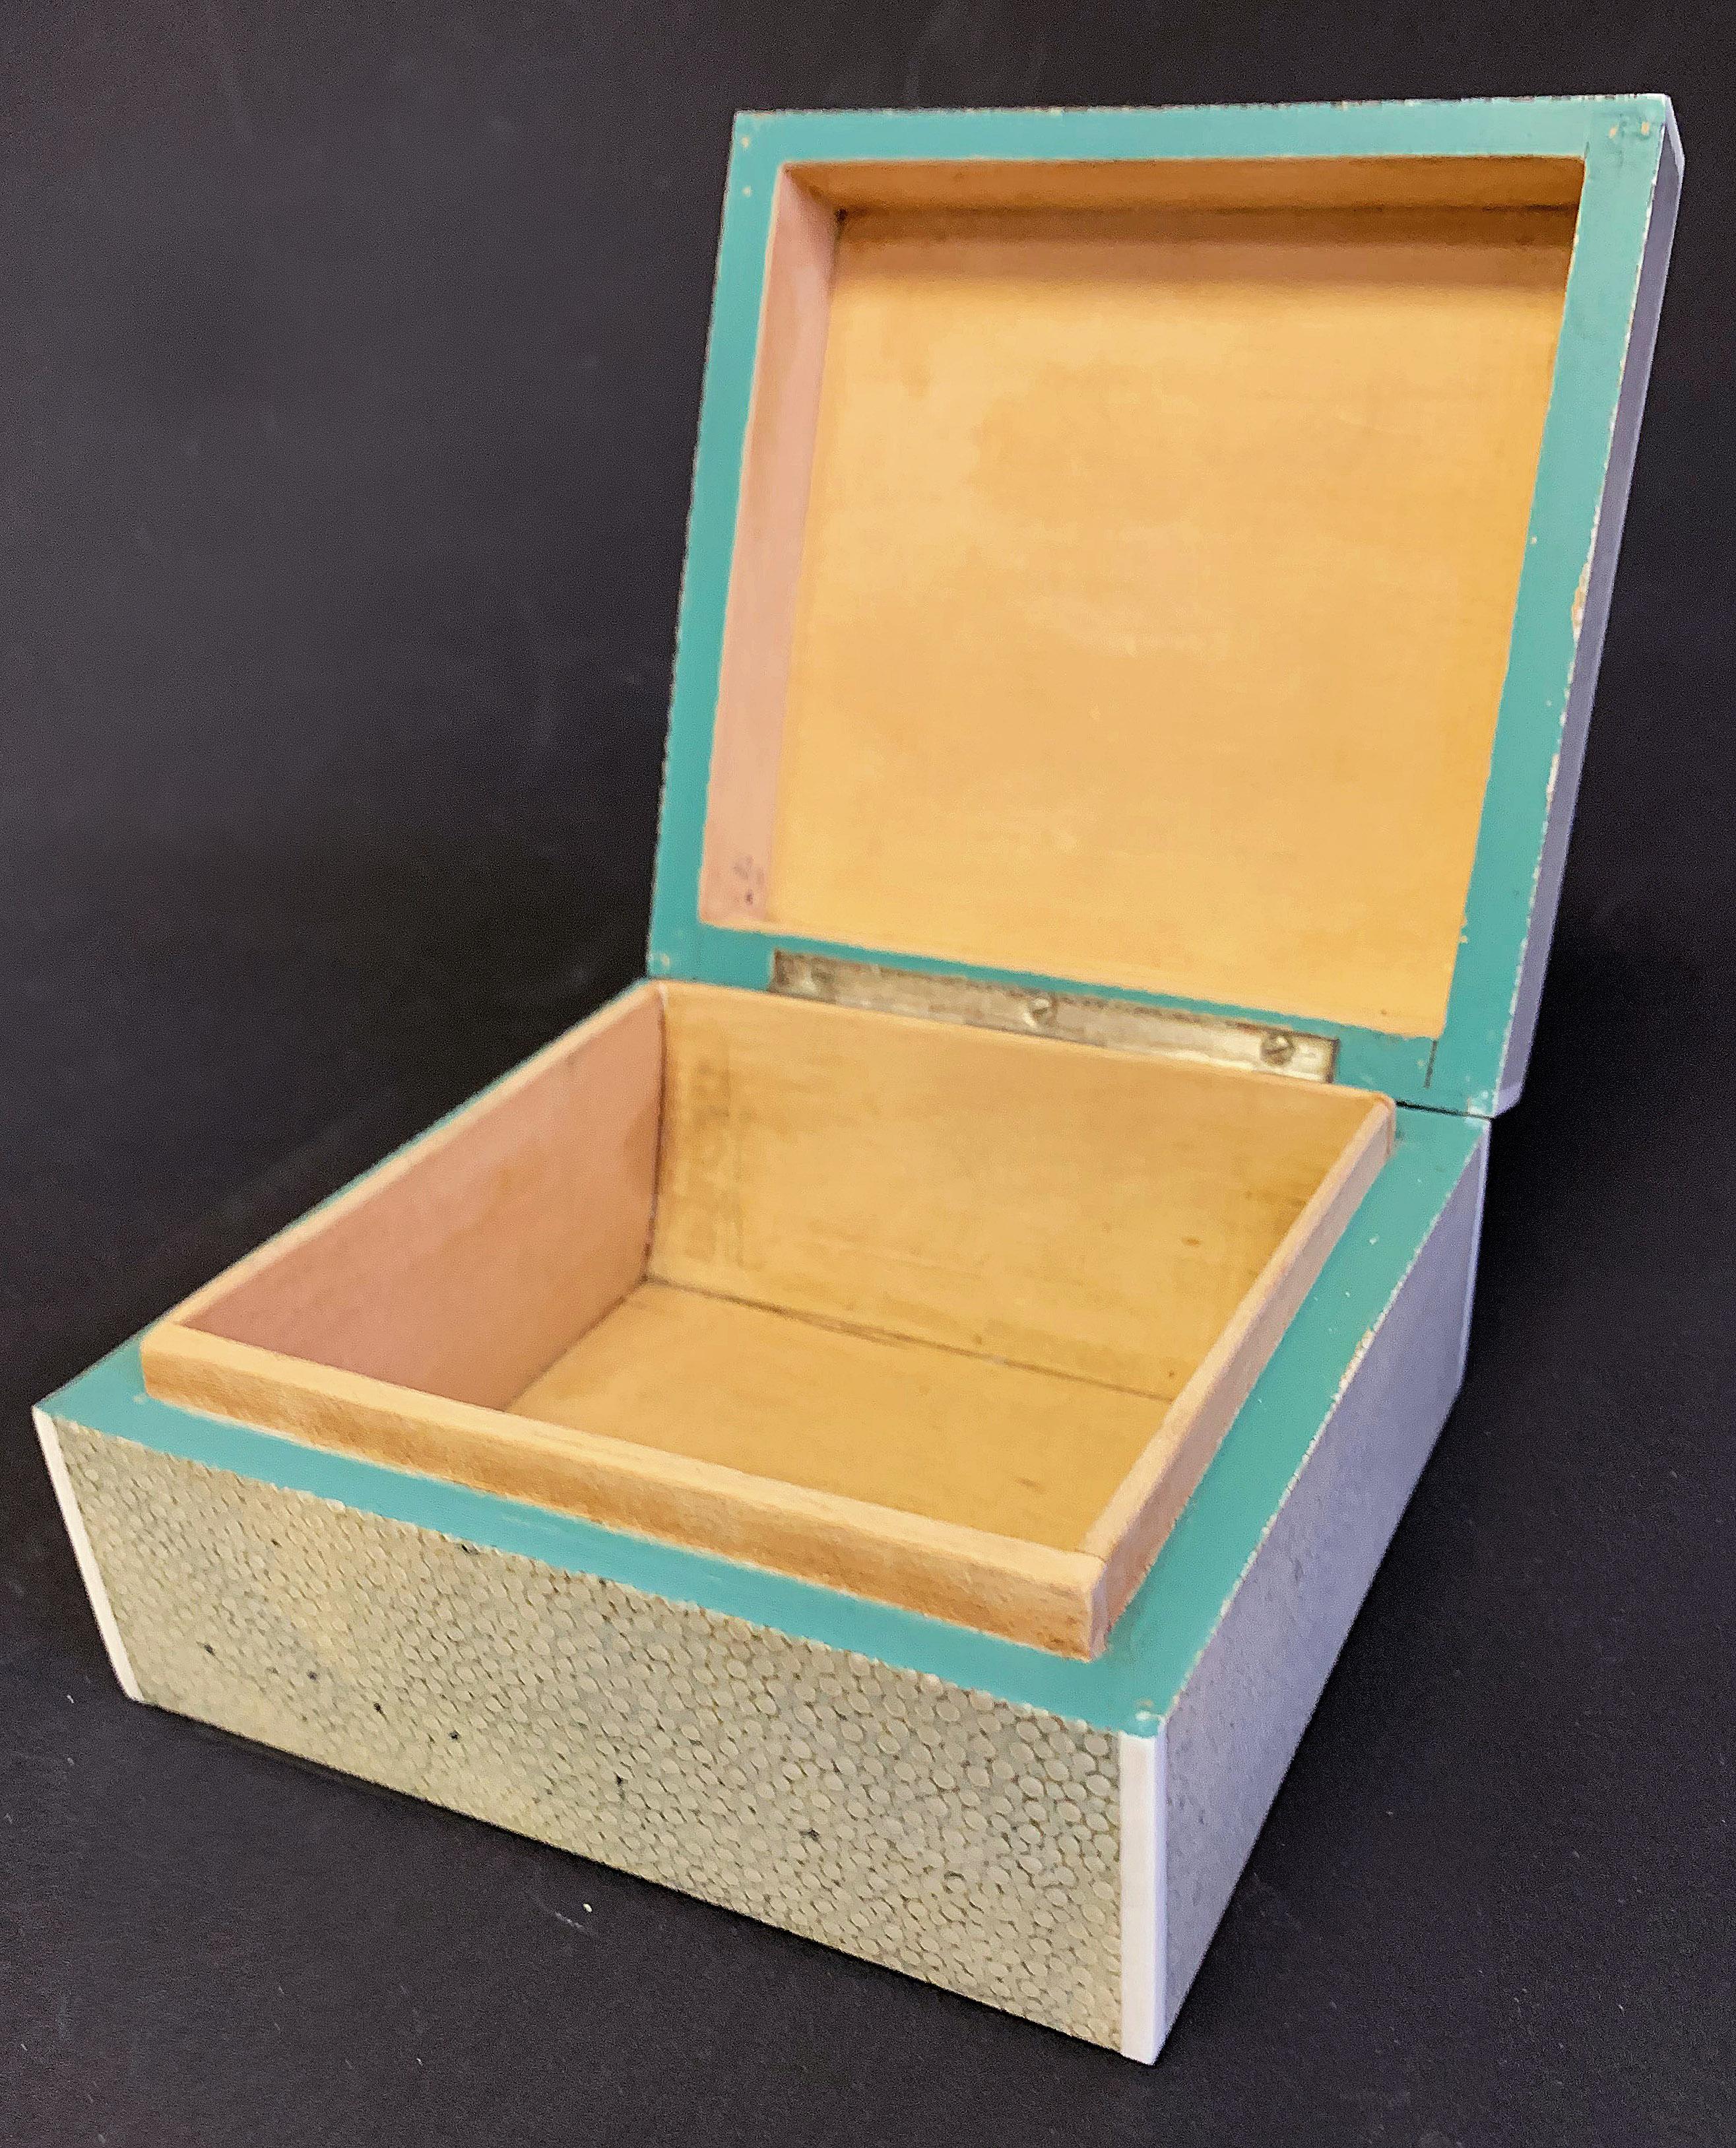 Beautifully finished in panels of ivory-toned shagreen, this hinged box is a superb example of the craftsmanship practiced by the famed Asprey Company in London. Founded in the late 18th century, Asprey hired silversmiths, goldsmiths, jewellers and